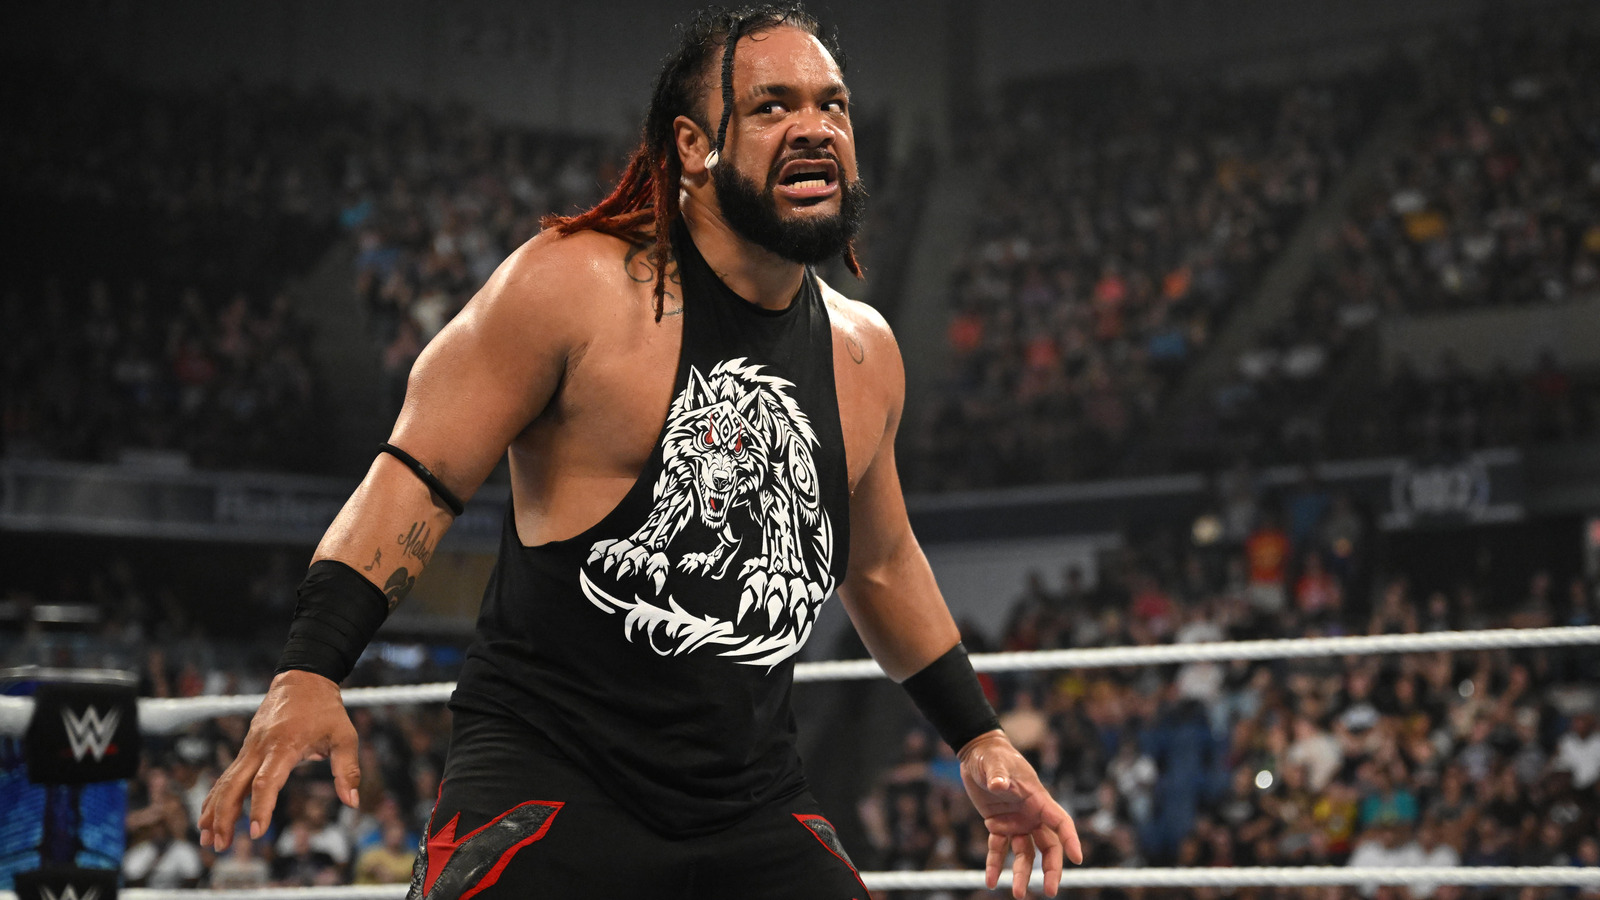 WWE SmackDown Live Coverage 7/26 – Number One Contenders Gauntlet Match, Women’s Tag Team Bout